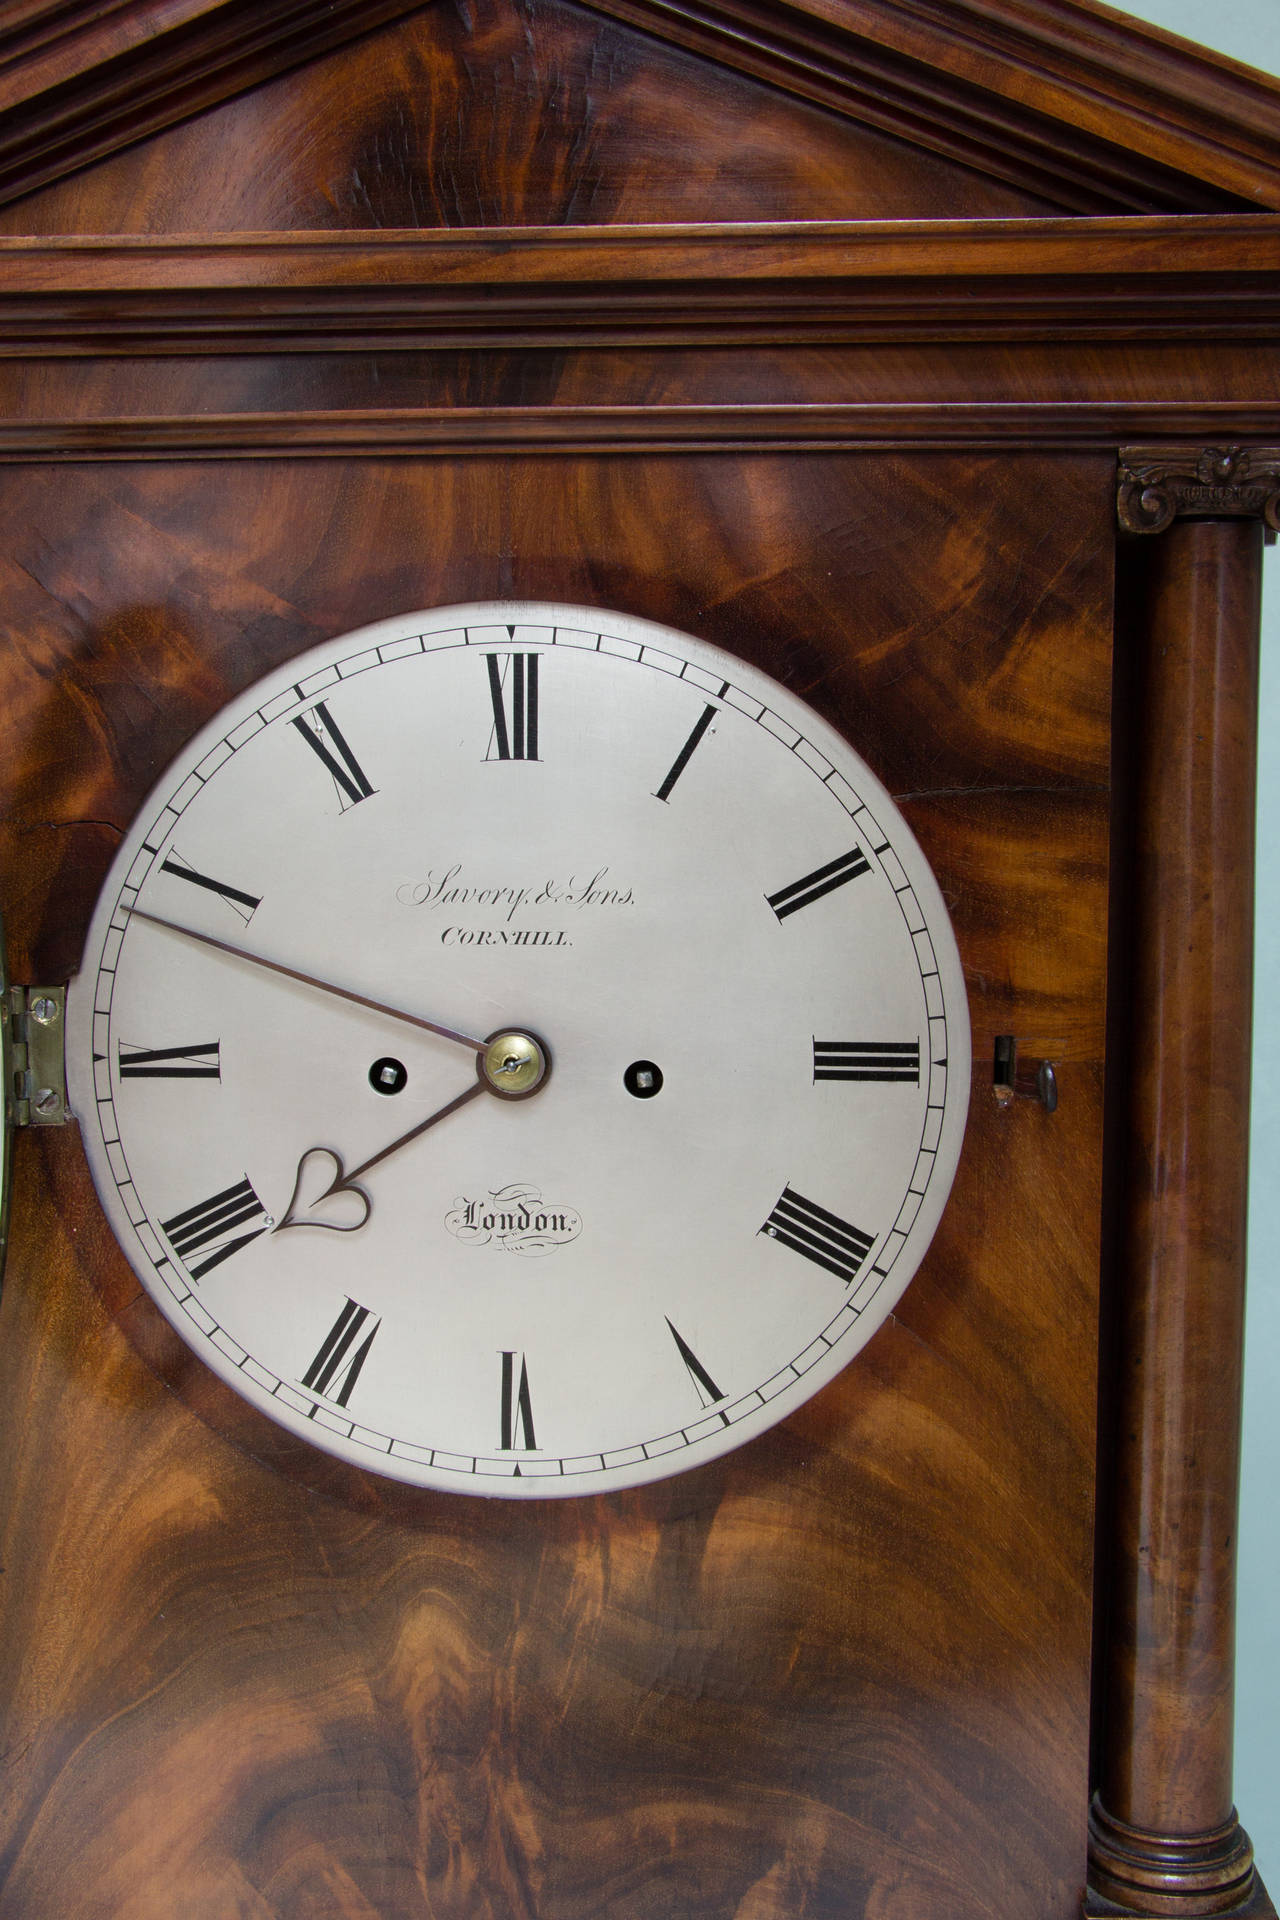 Mahogany Bracket Clock Signed Savory & Sons, Cornhill In Good Condition For Sale In Kent, GB